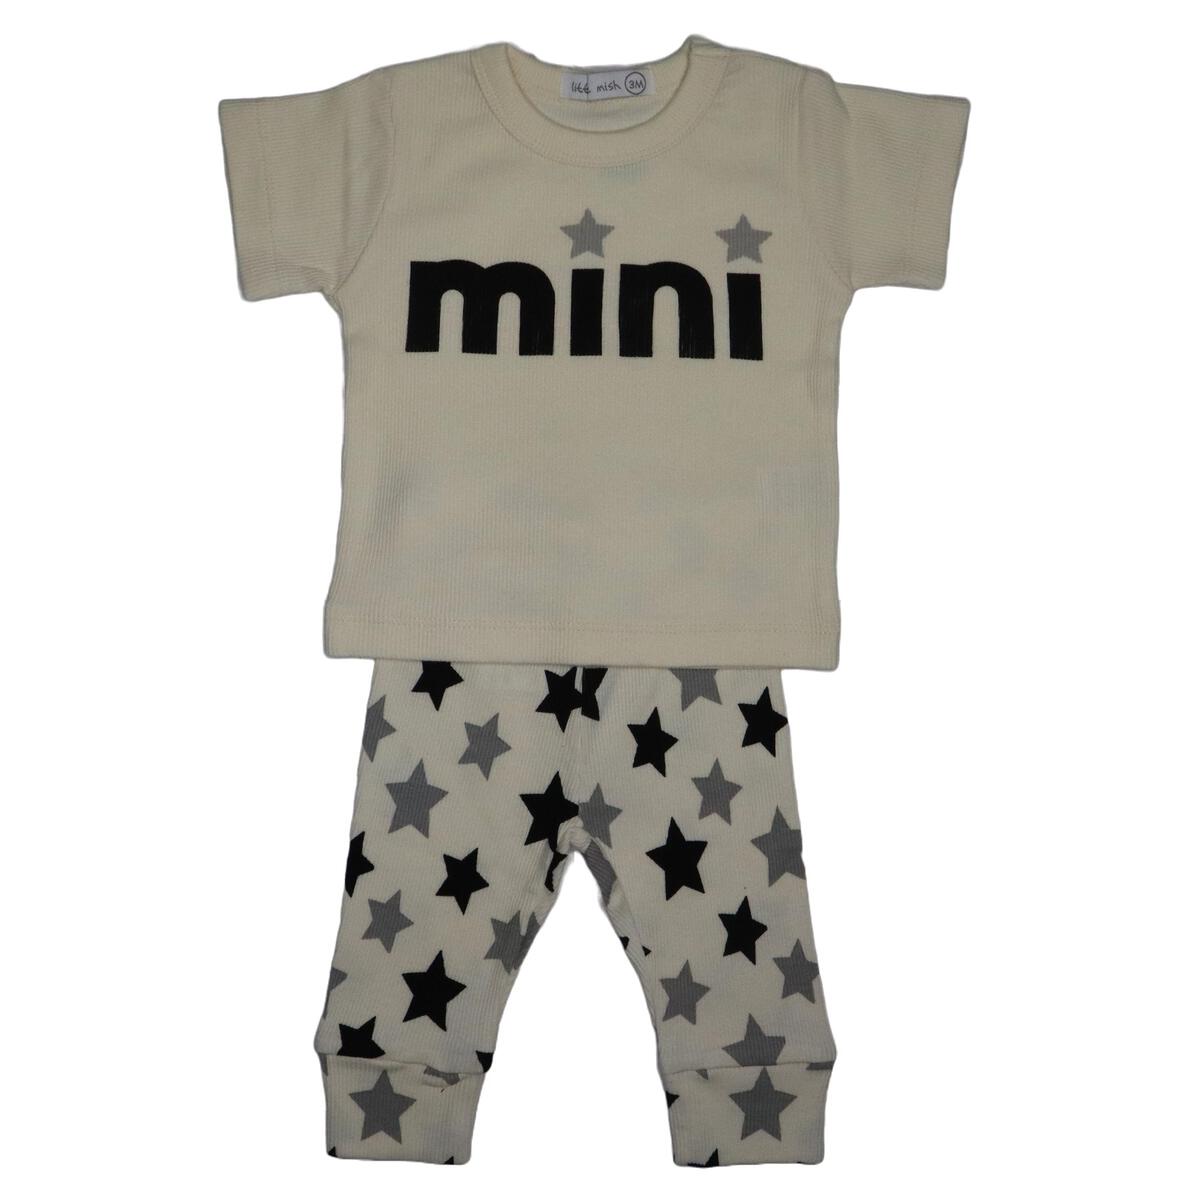 Ribbed Sand Star Tee & Pant Set - Twinkle Twinkle Little One